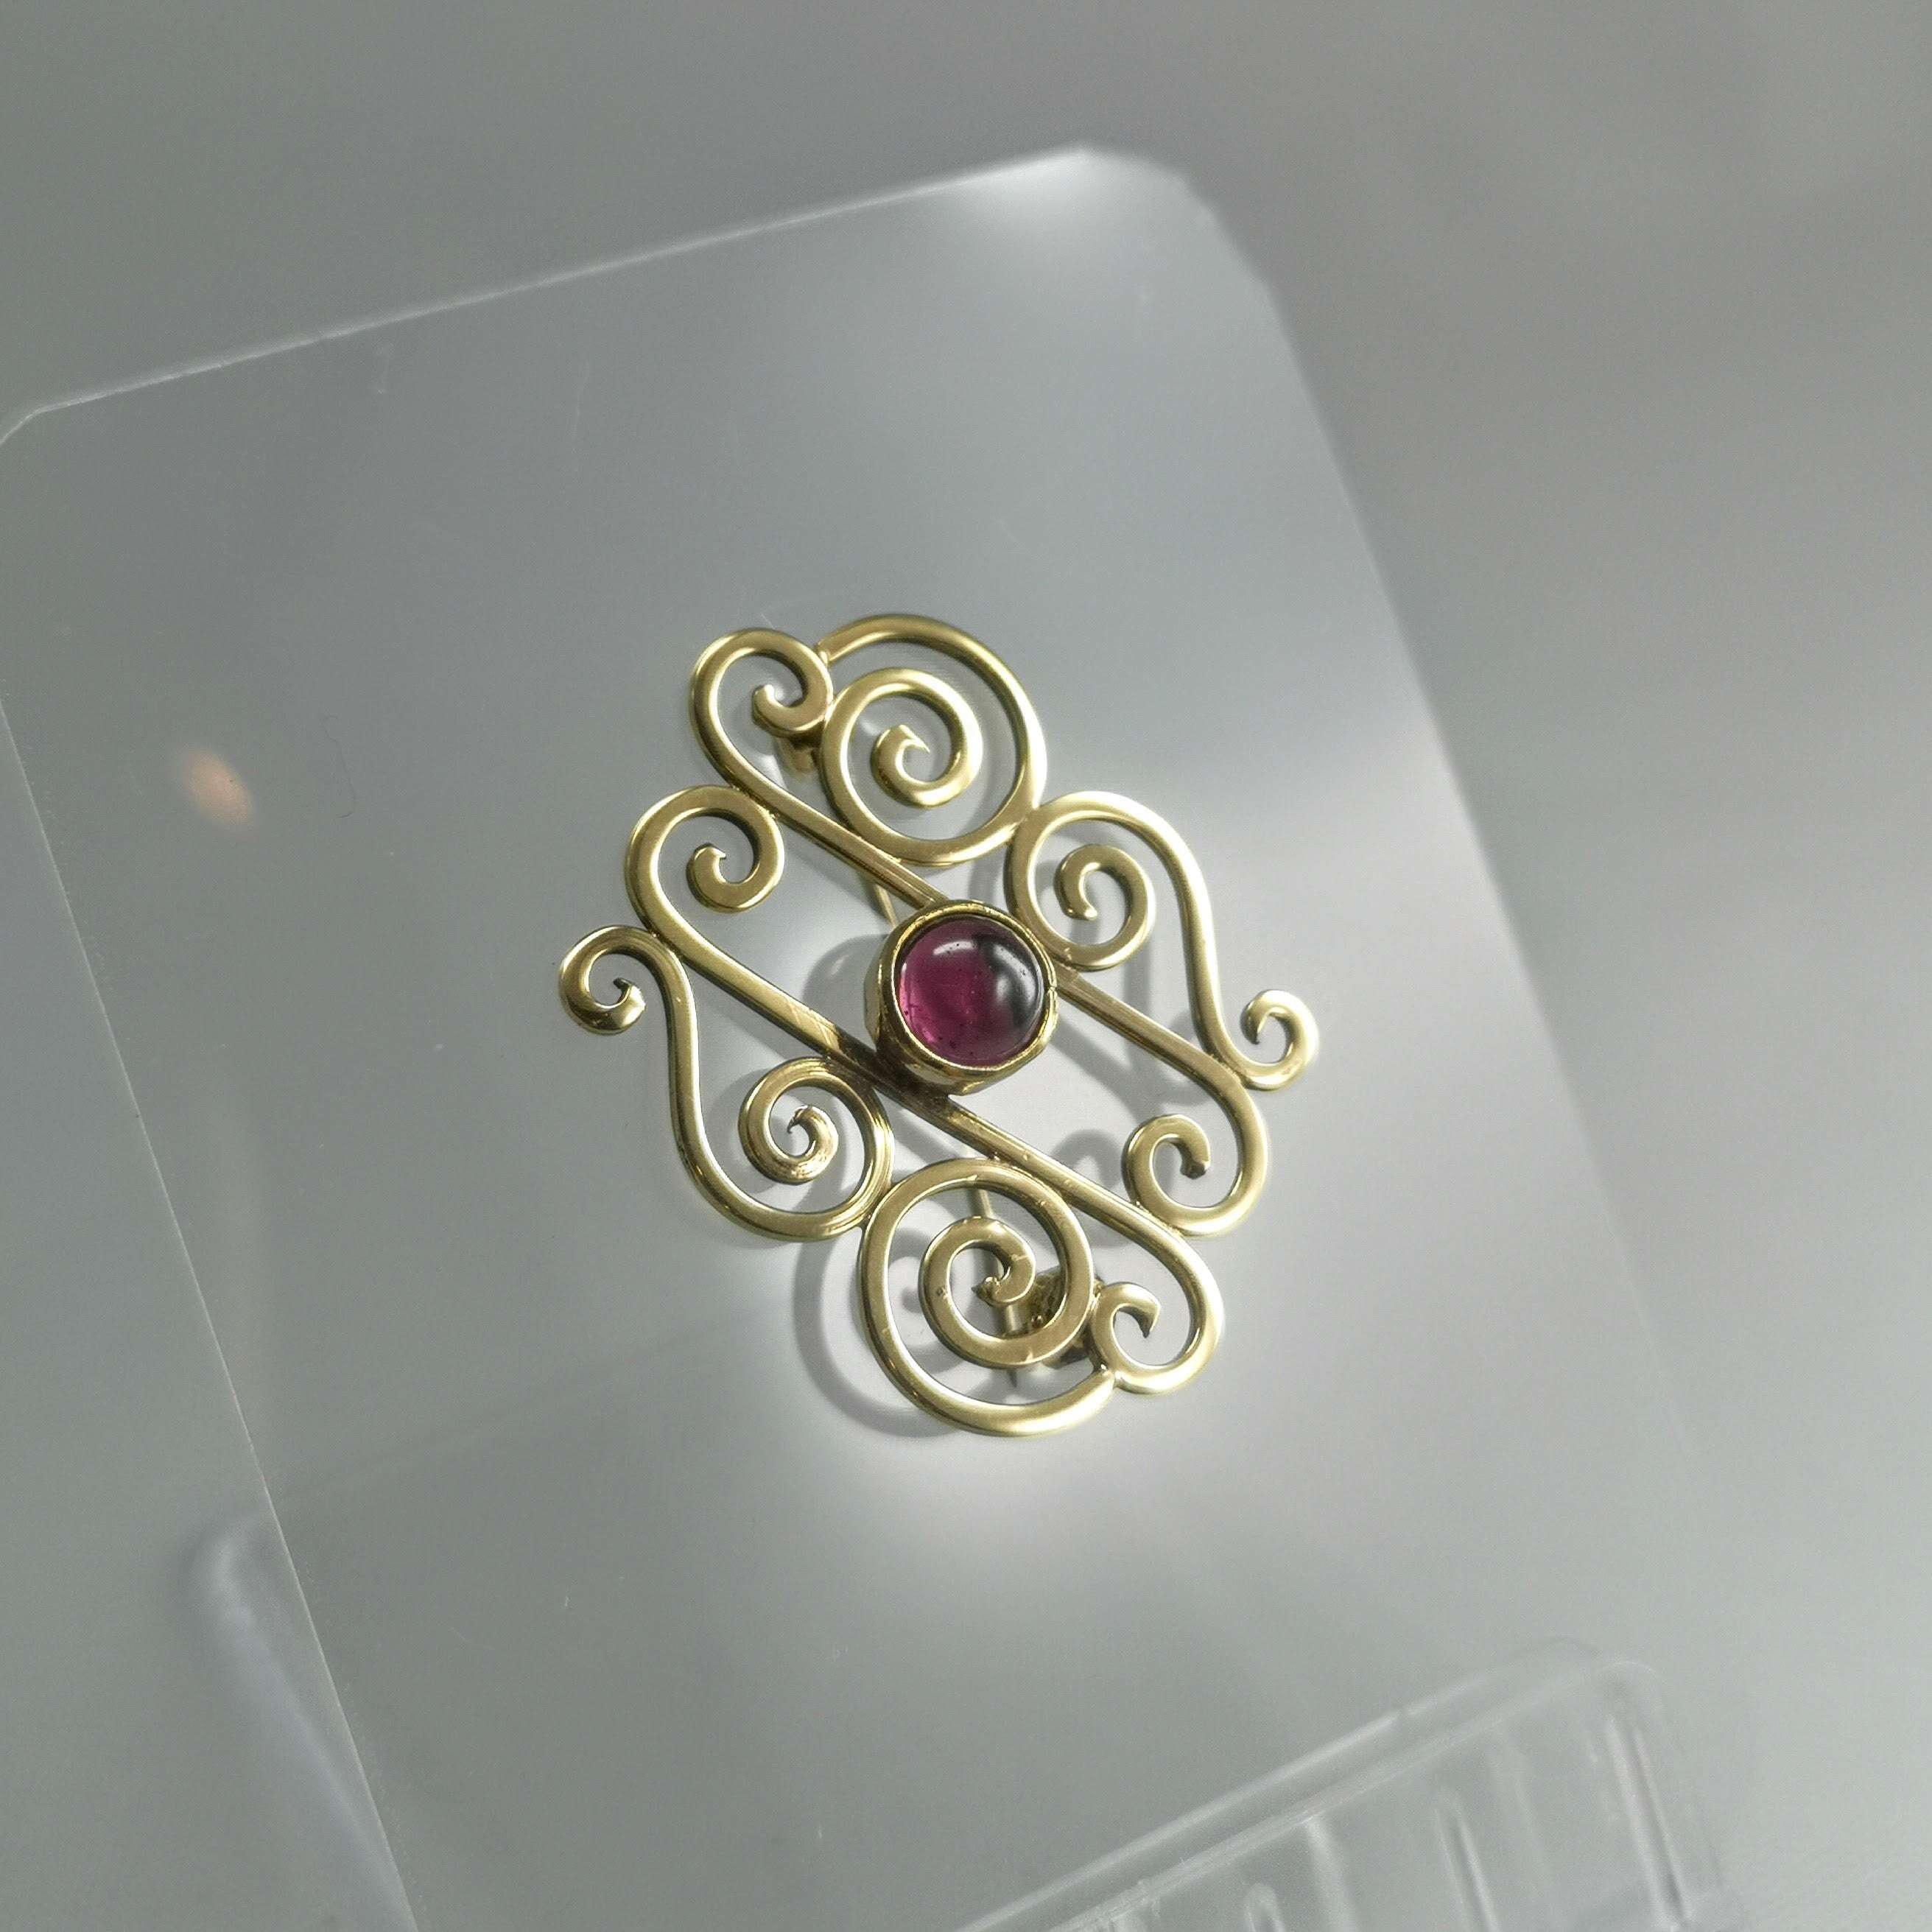 9ct Gold celtic spiral brooch with a garnet stone